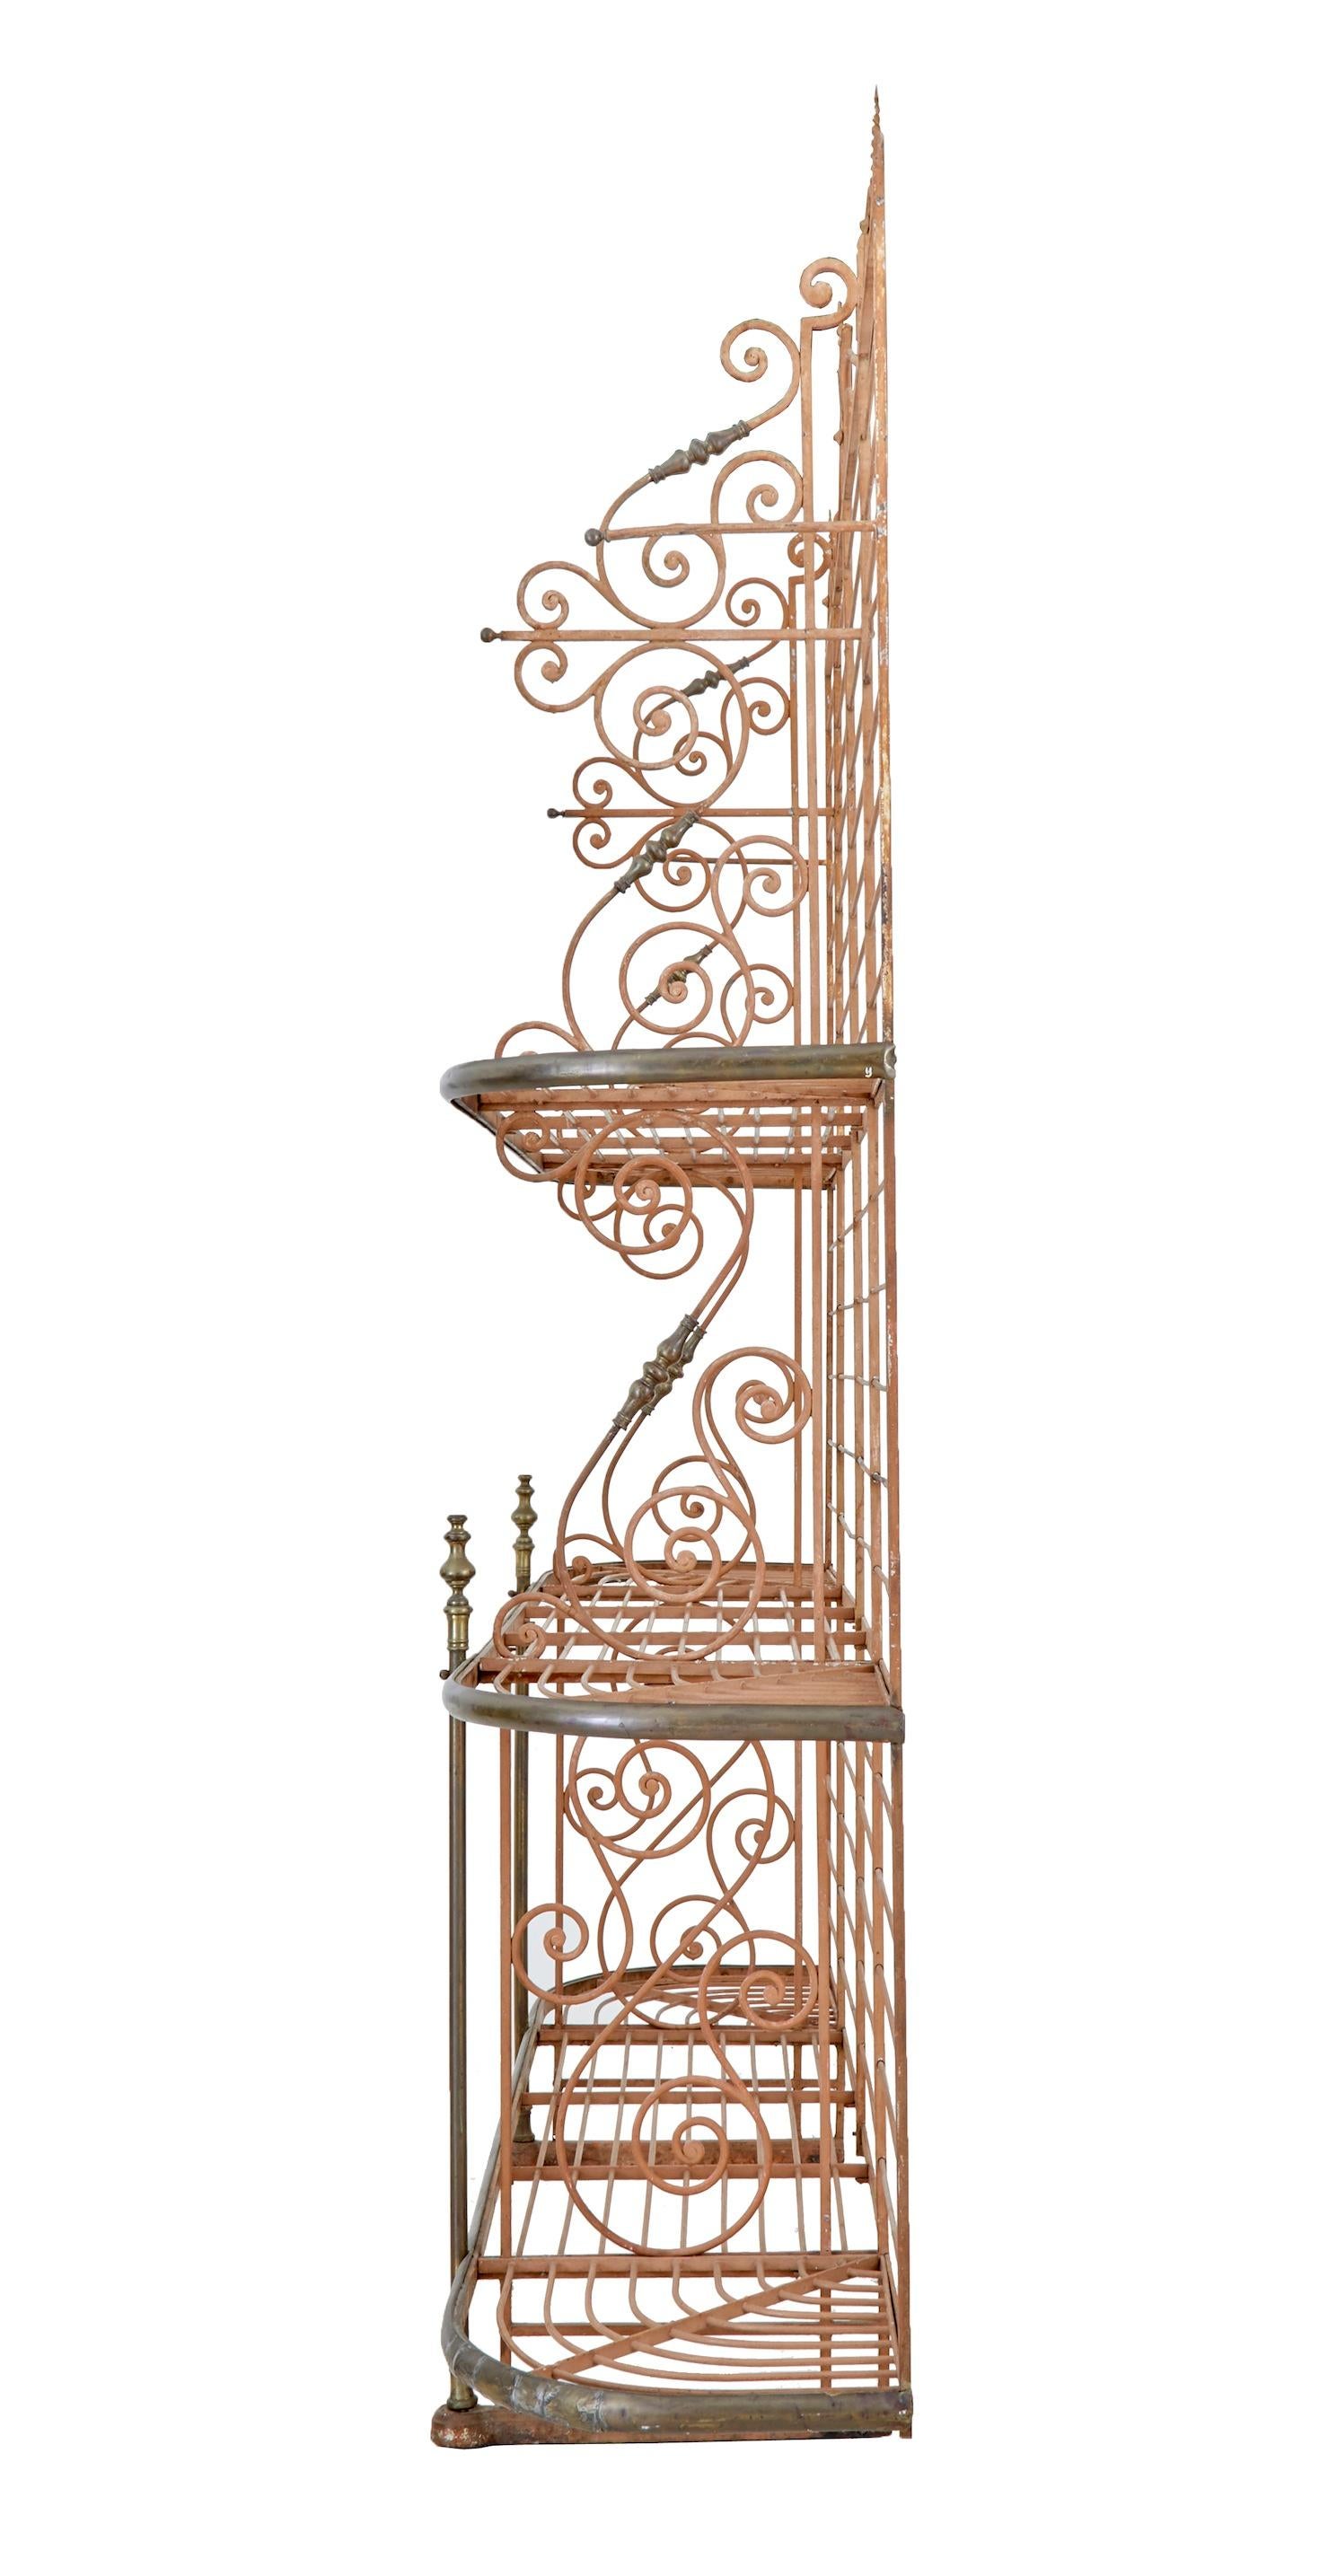 Early 20th century French Parisienne boulangers bread rack, circa 1900.

Superb quality boulangerie baguette rack. Made from iron with various detailing such as twists and monkey tails. 3 shelves with 2 partitions running the full height to